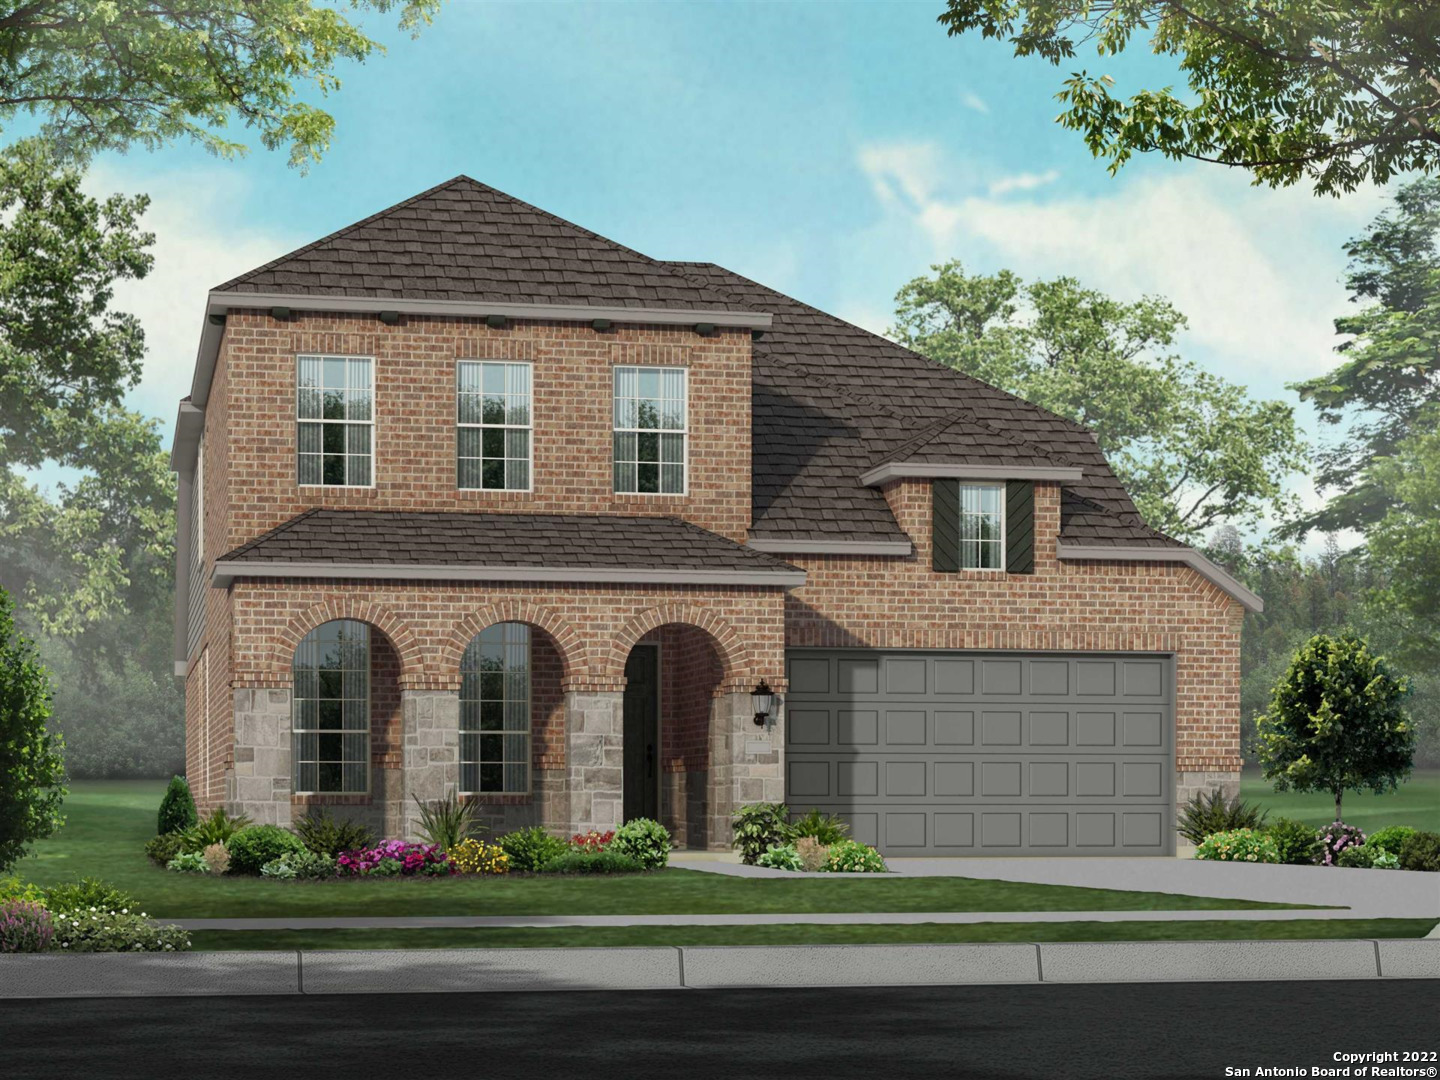 MLS# 1588440 - Built by Highland Homes - October completion! ~ This 2 story brick home is perfect for a family with the game and entertainment space upstairs! The home interior design palette is a neutral cream white with maple cabinets and porcelain tile floors in primary living areas.